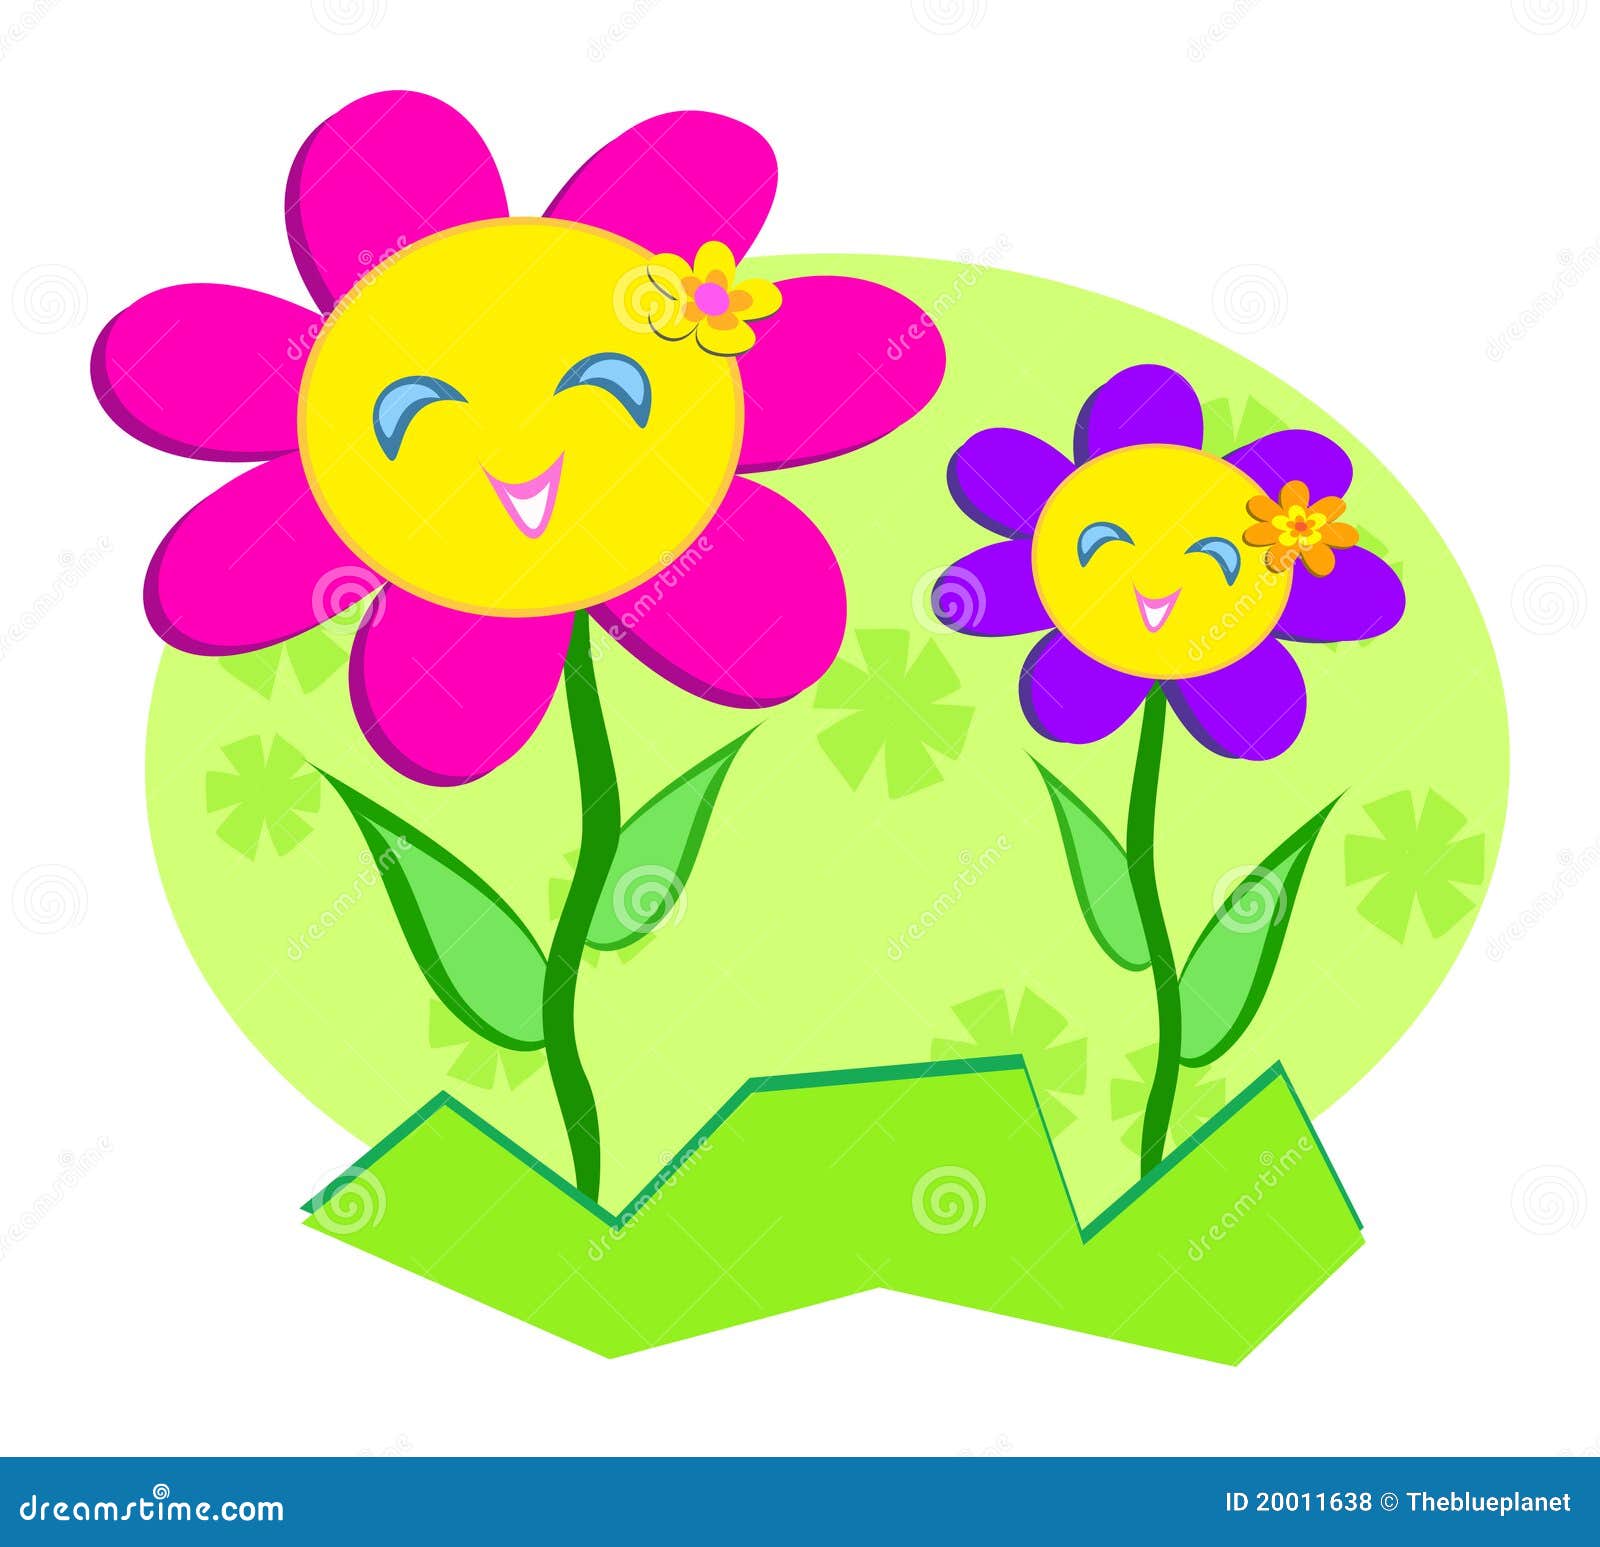 free clipart happy flowers - photo #19